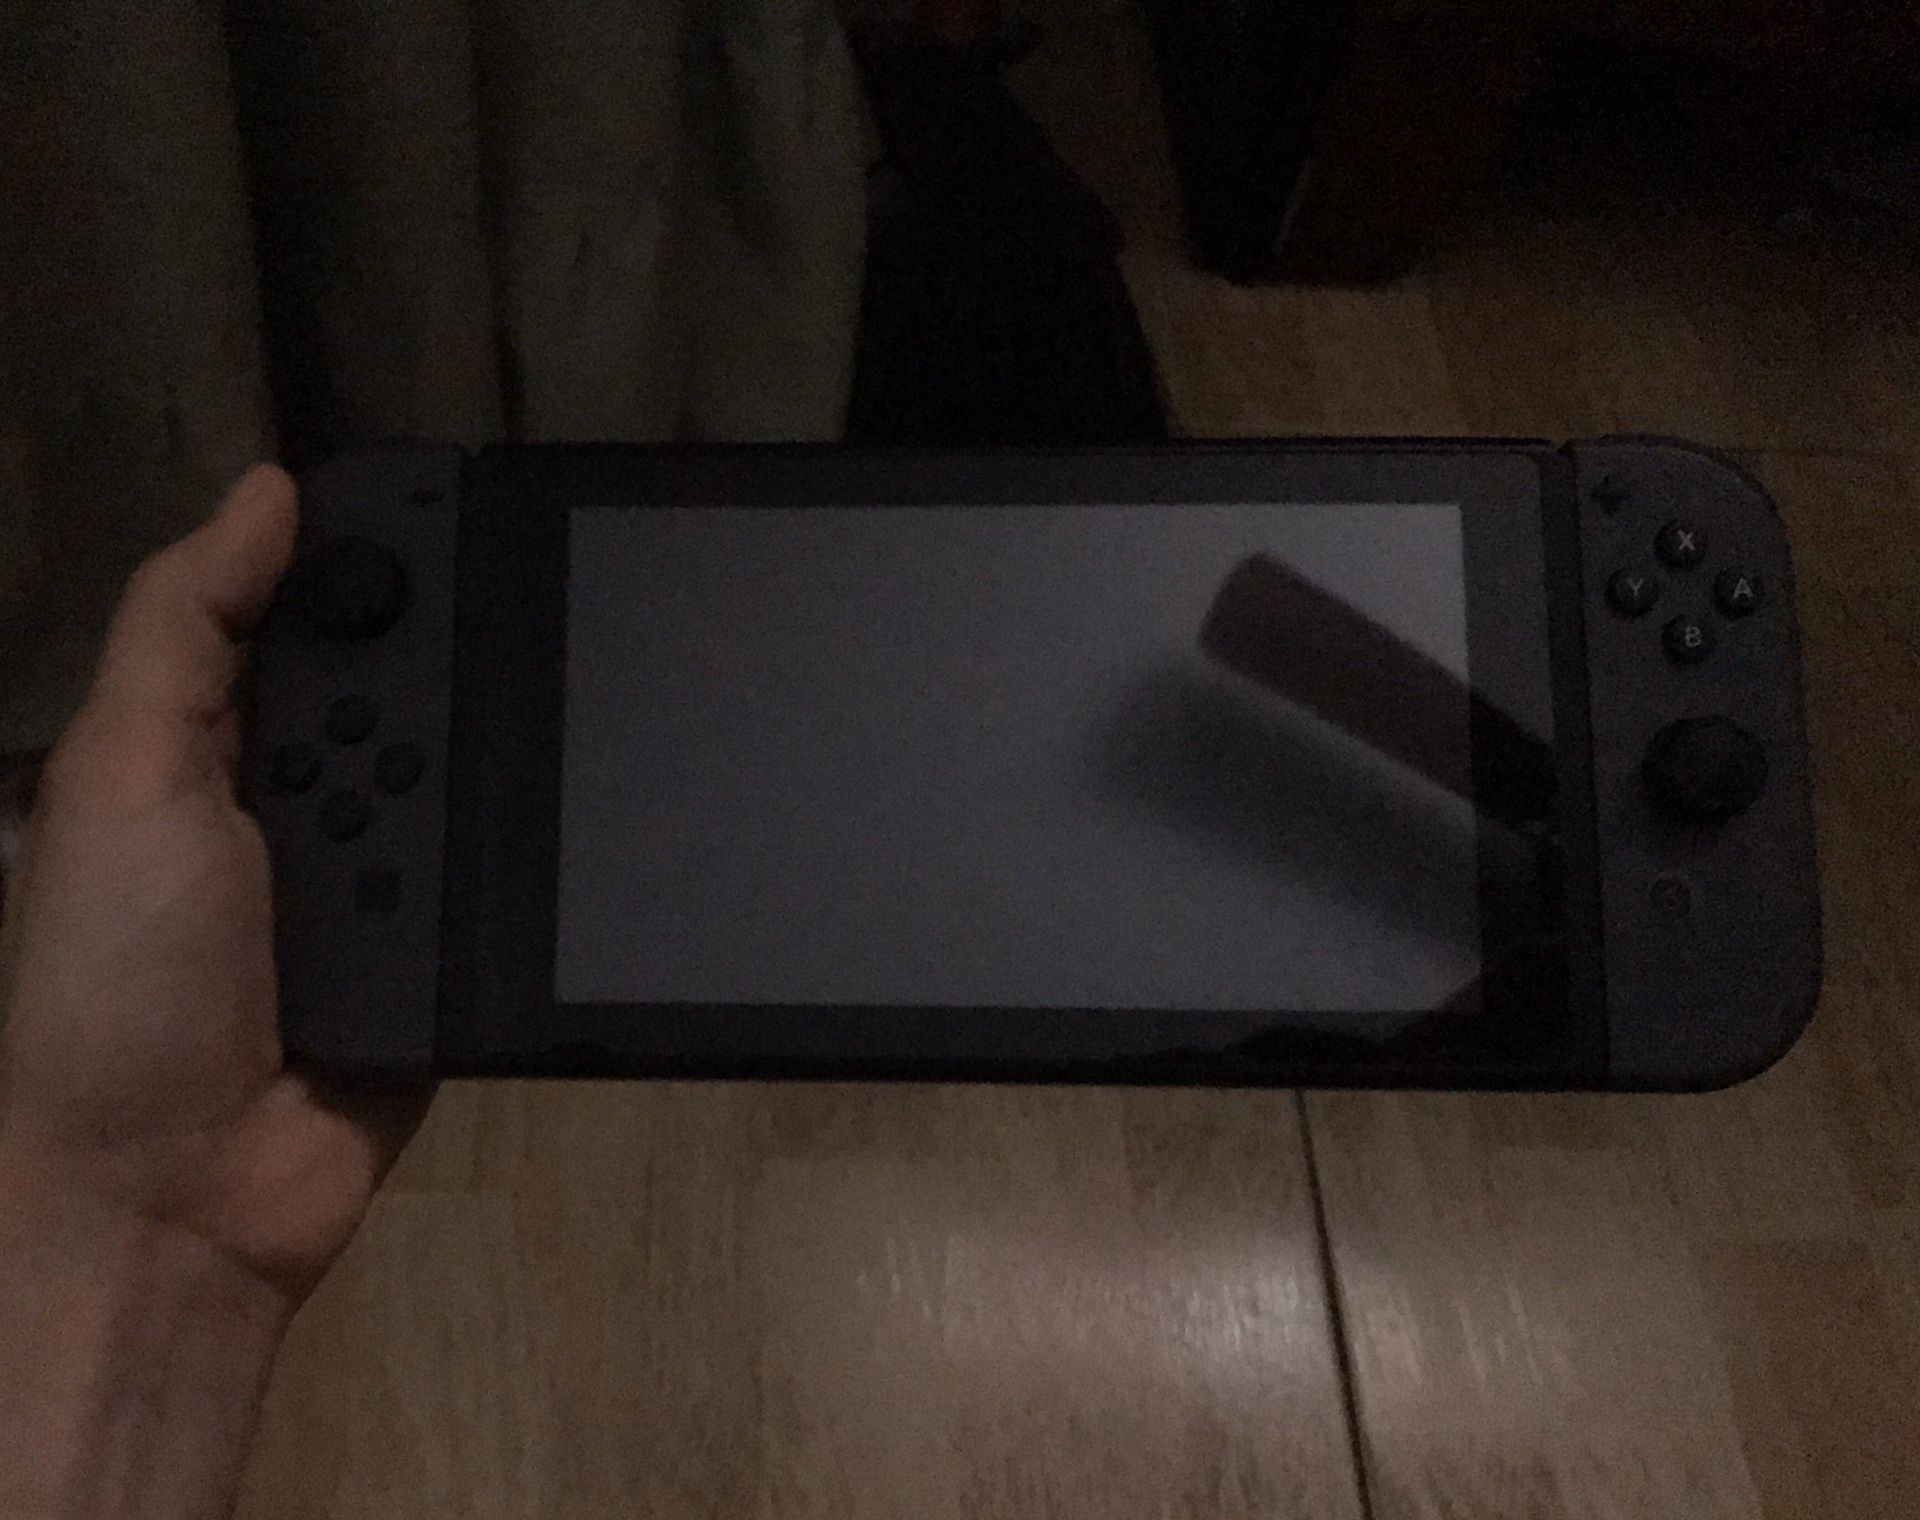 *PRICE NEGOTIABLE* Nintendo Switch Console